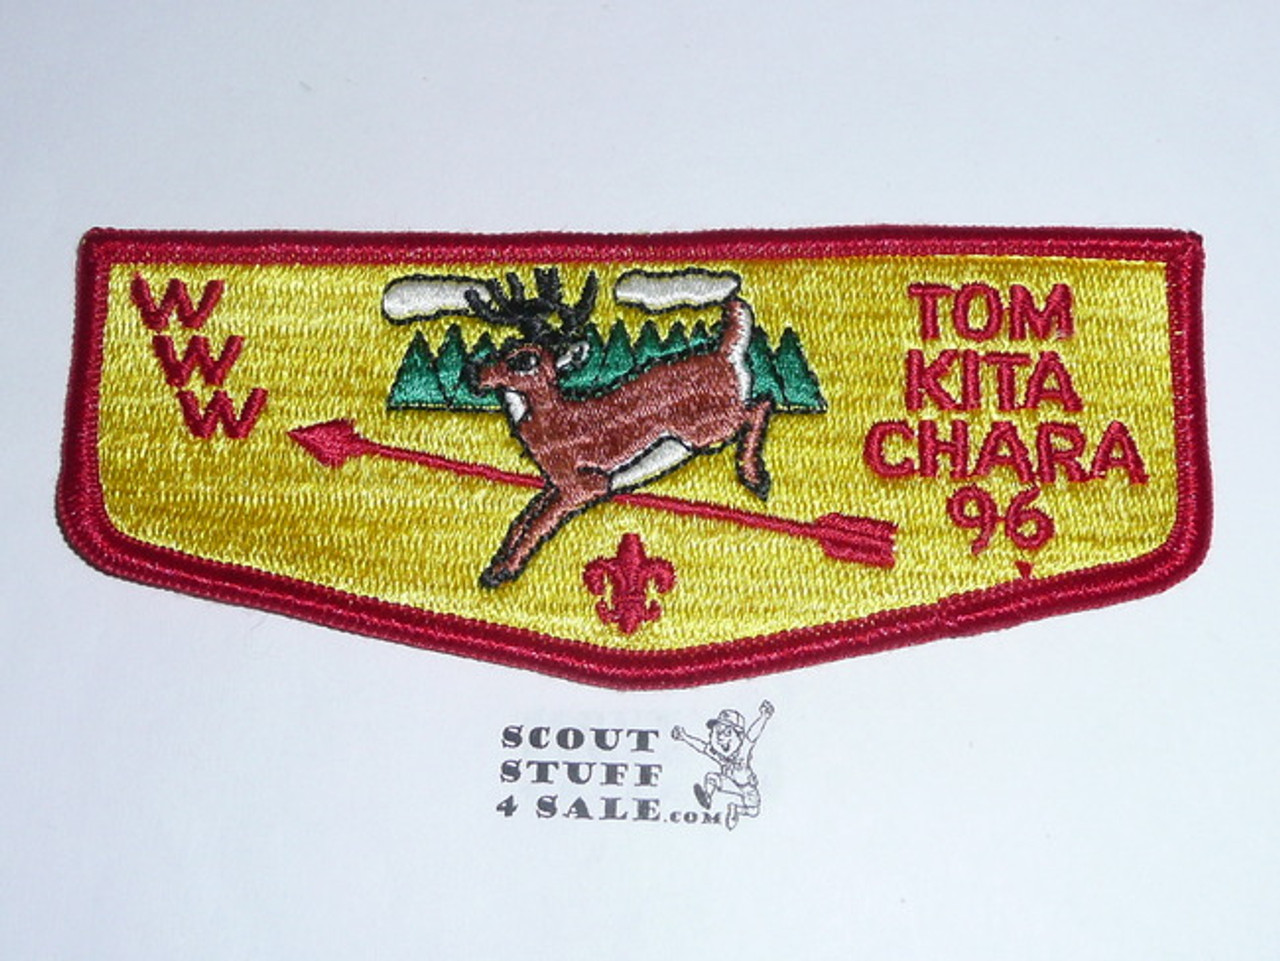 Order of the Arrow Lodge #96 Tom Kita Chara s9 Flap Patch